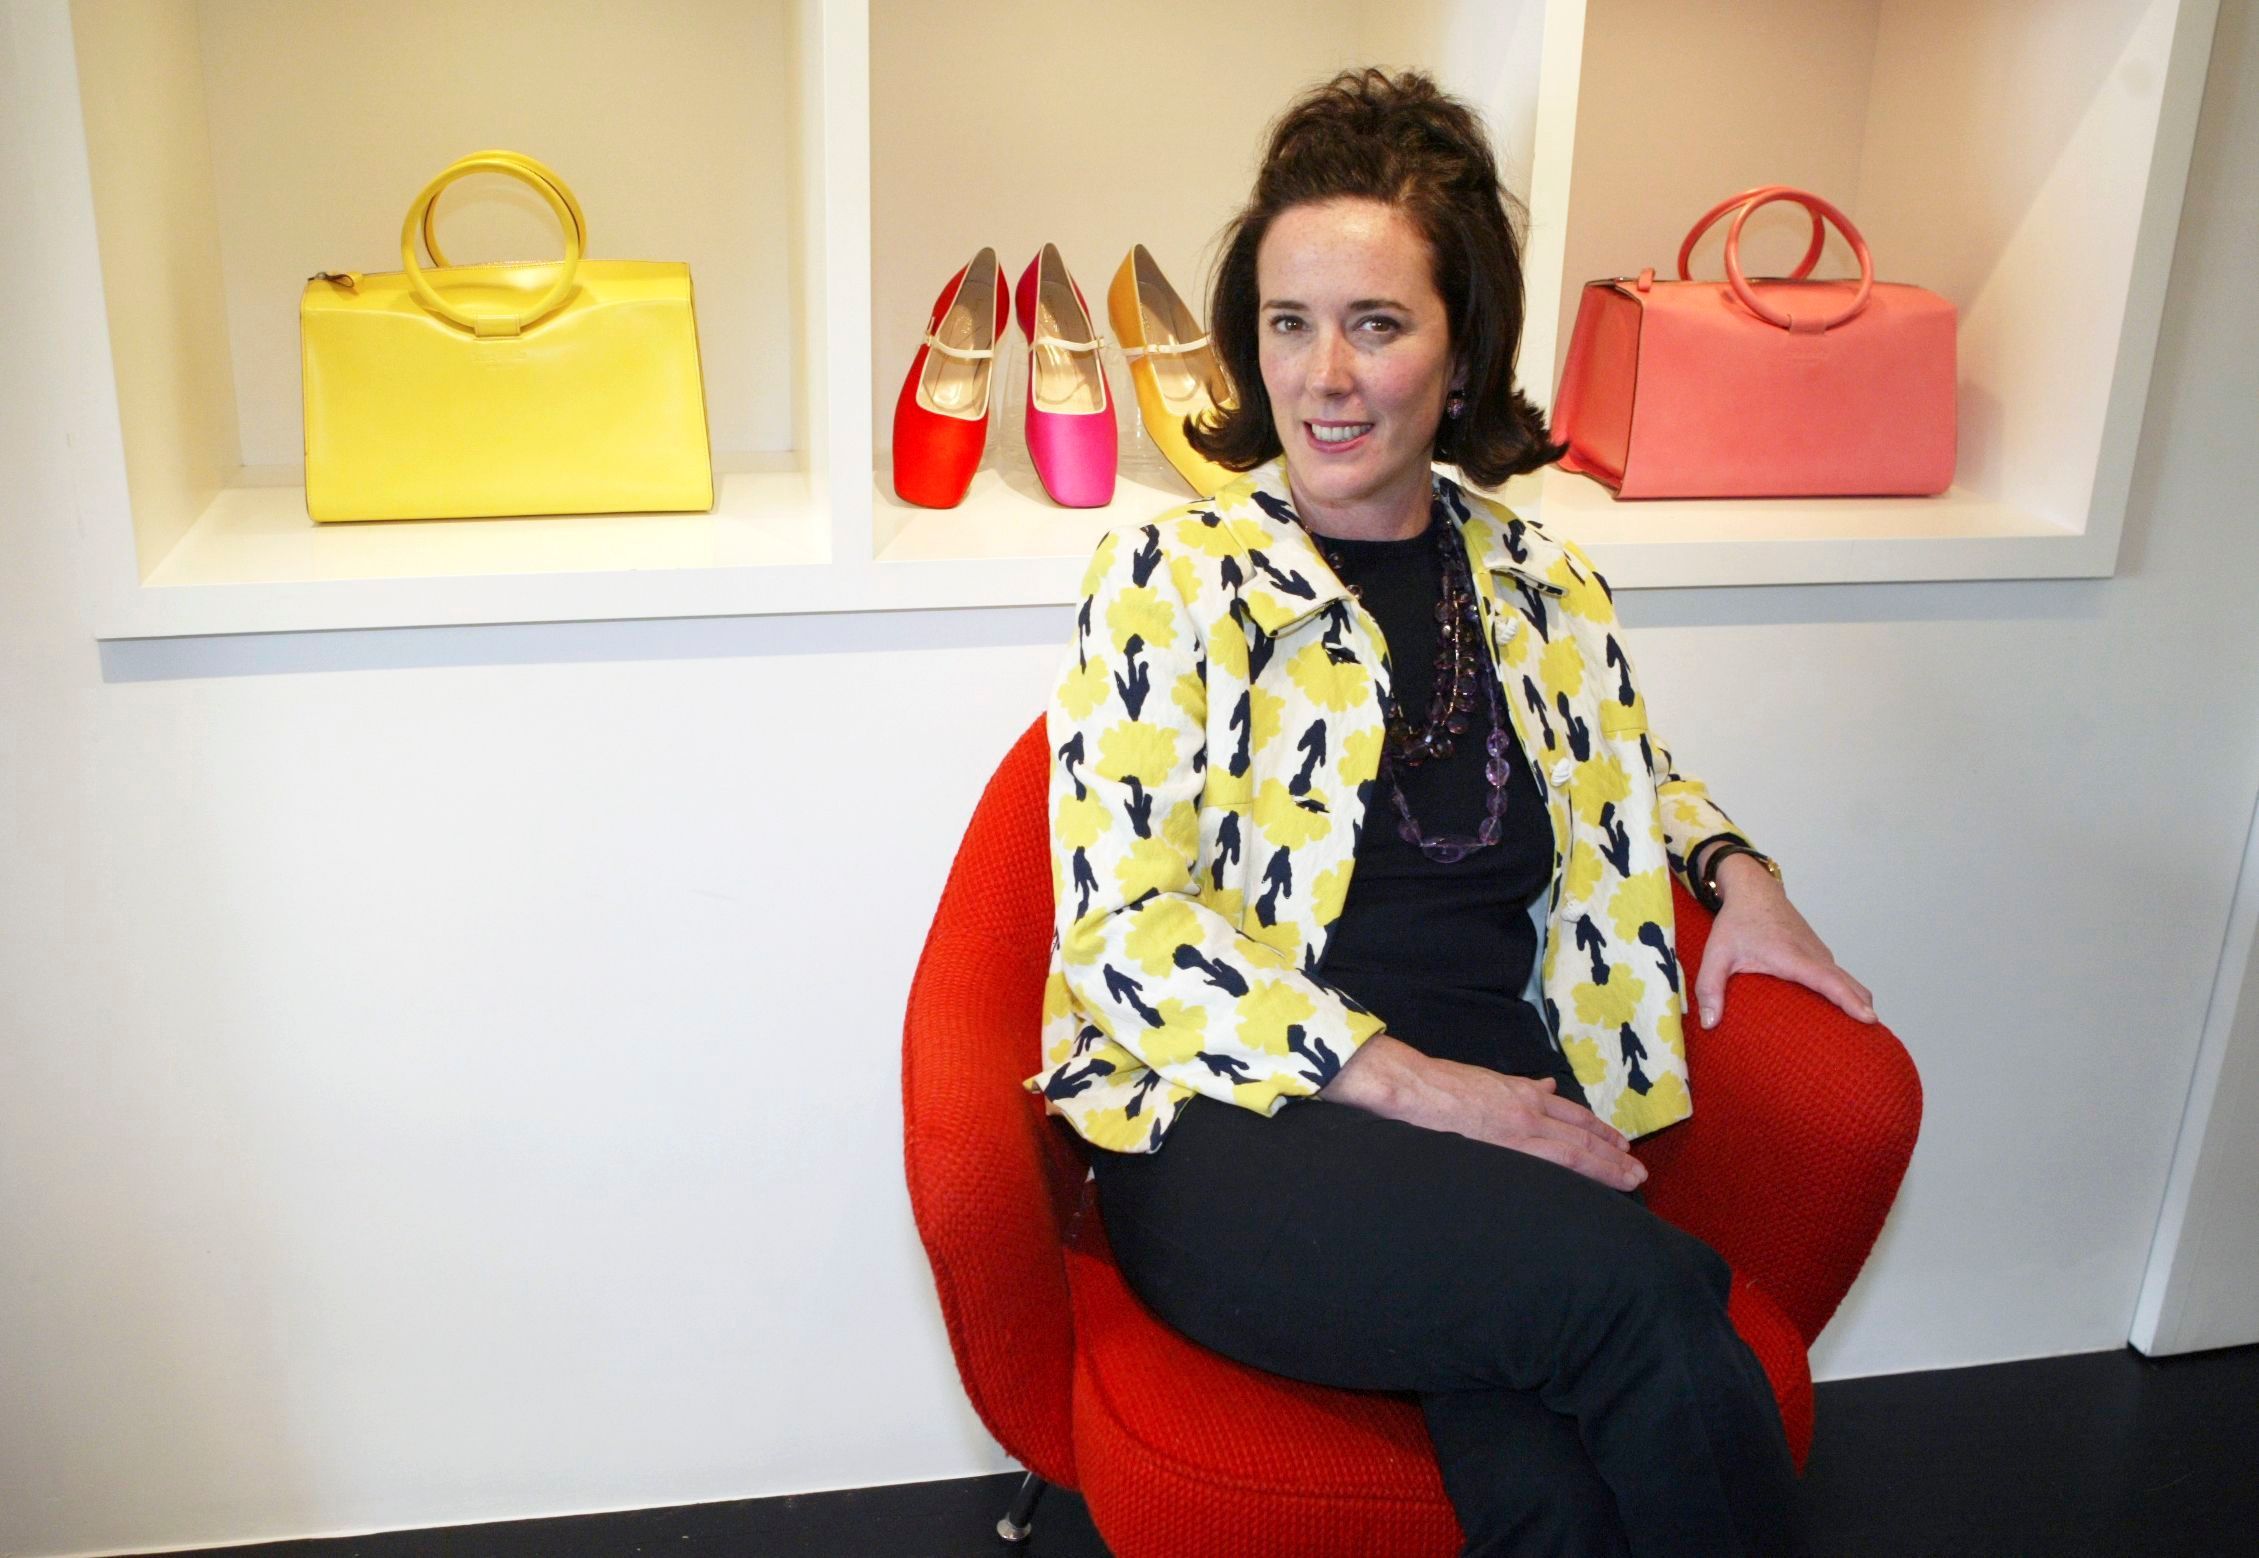 Photos of Kate Spade Through the Years - Pictures of Young Kate Spade to Now